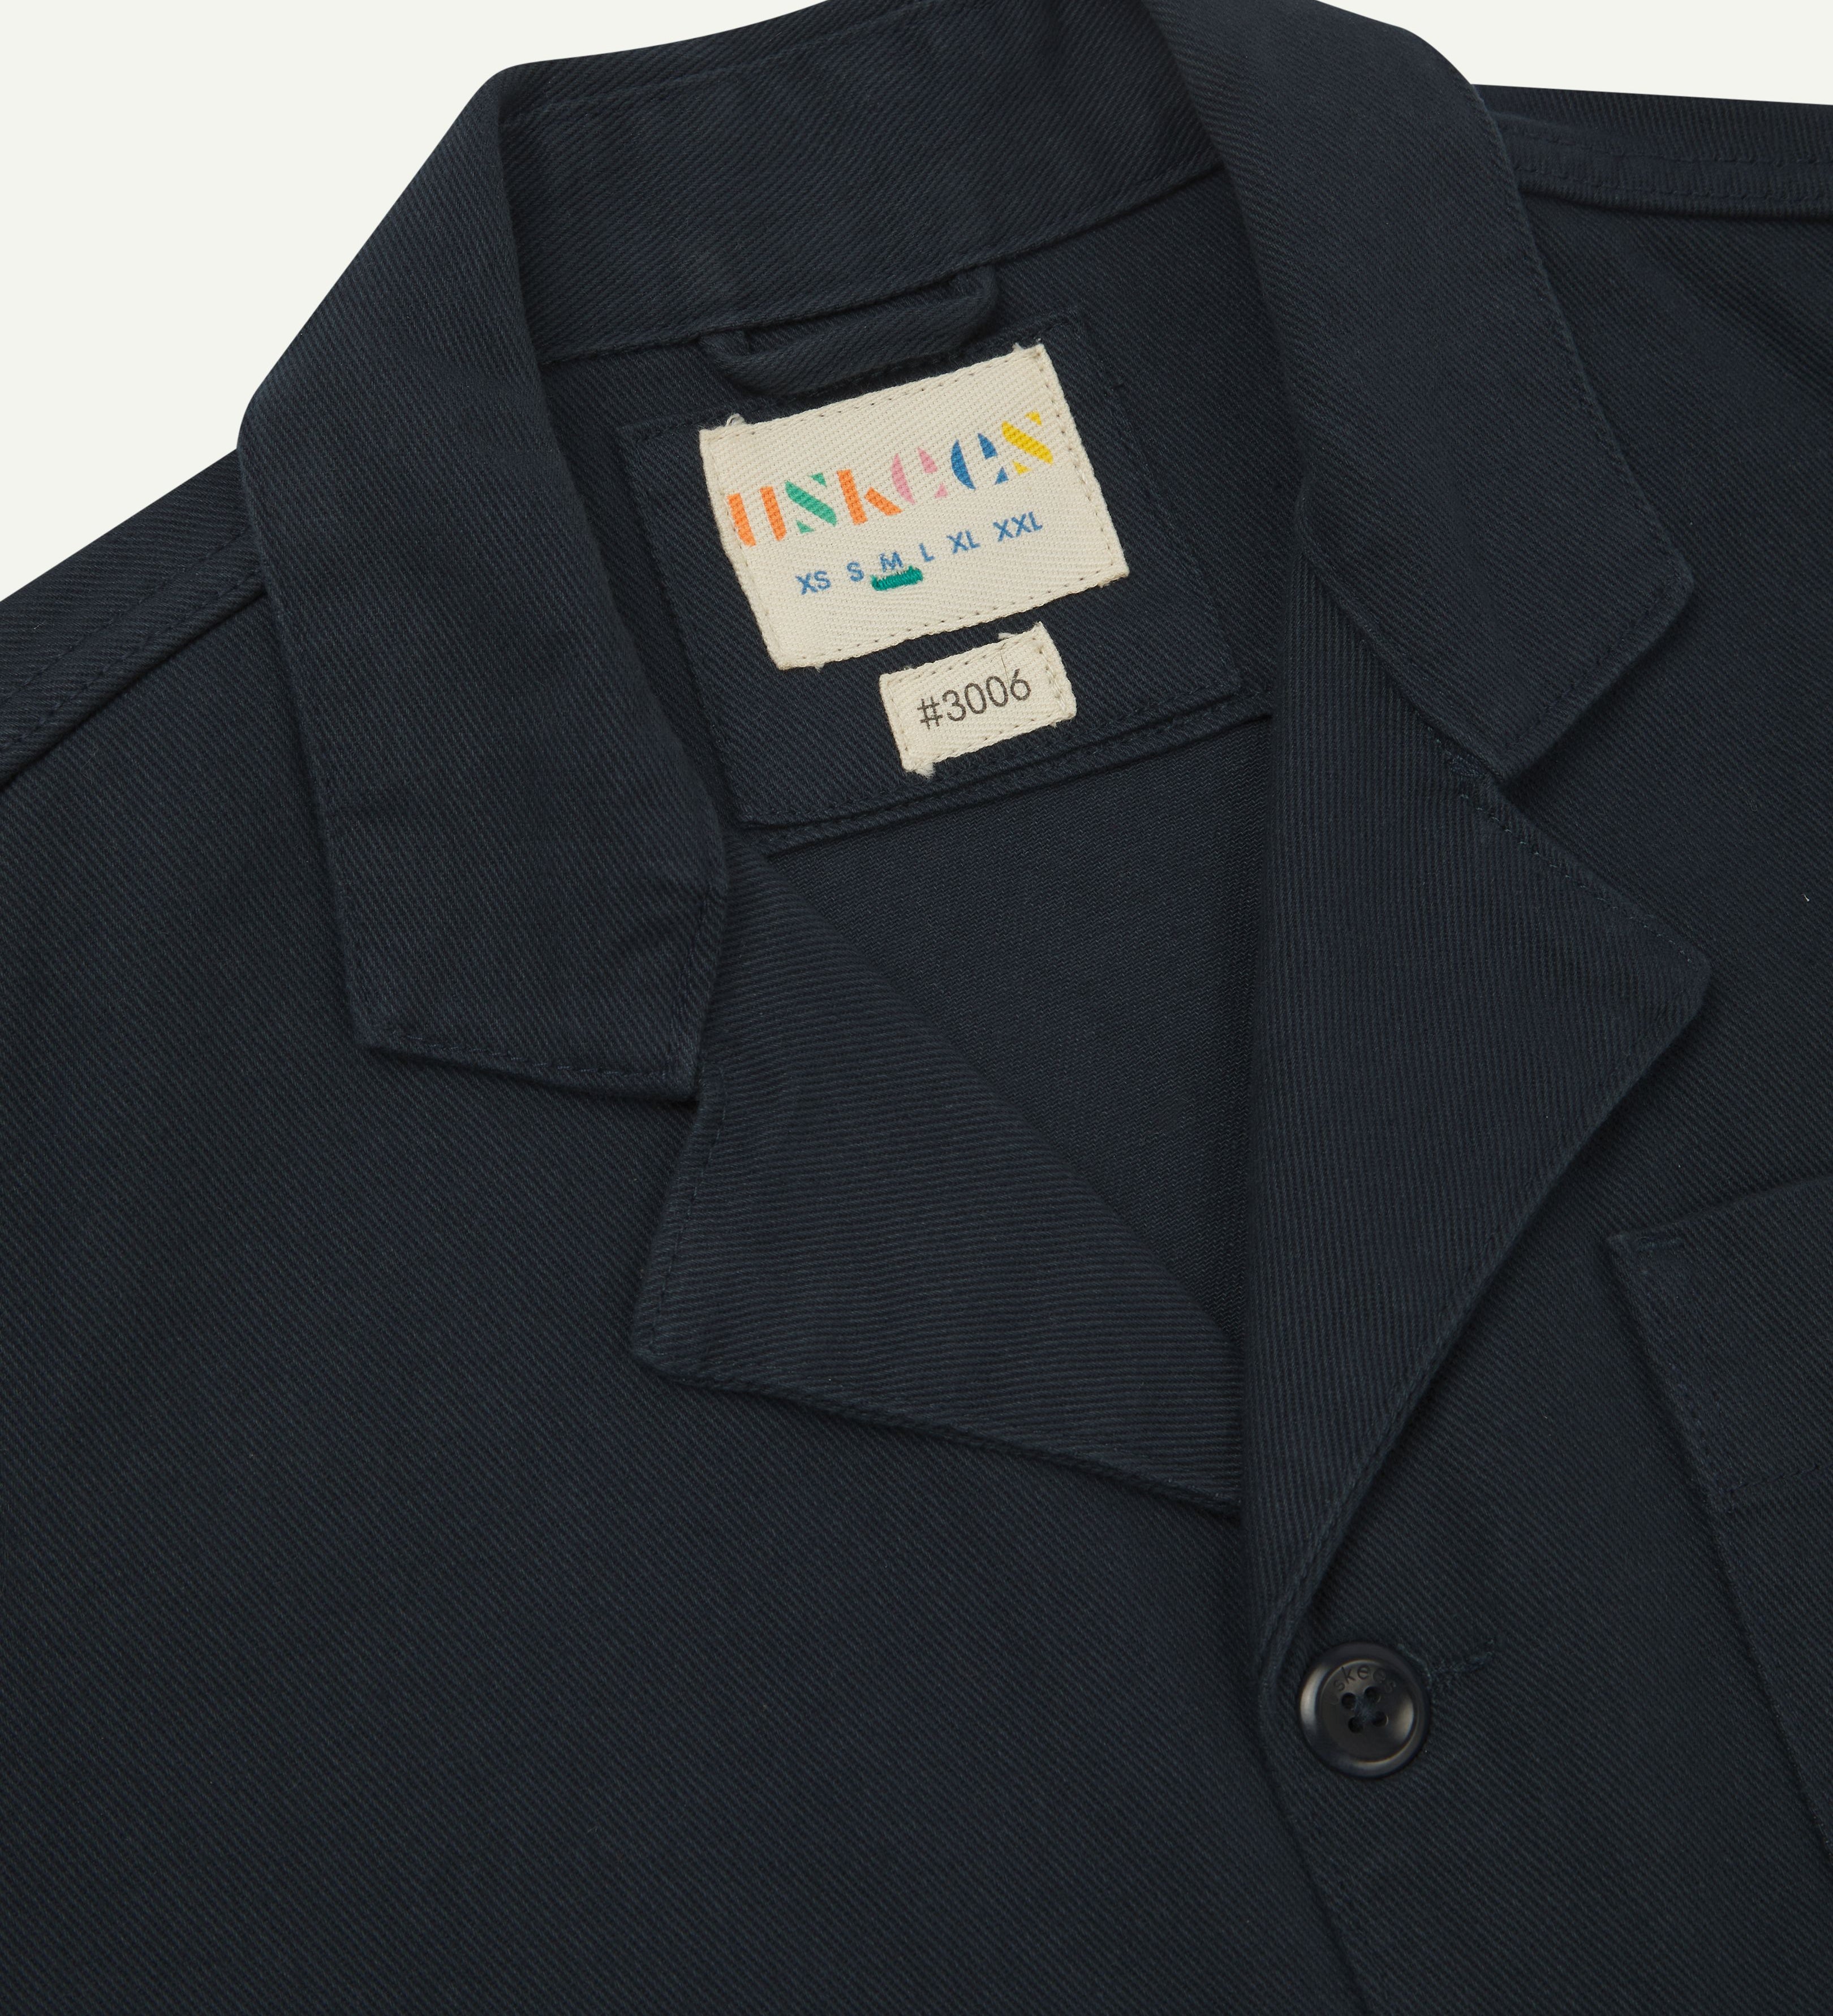 Close view of blueberry organic cotton drill blazer showing collar and Uskees branding label.